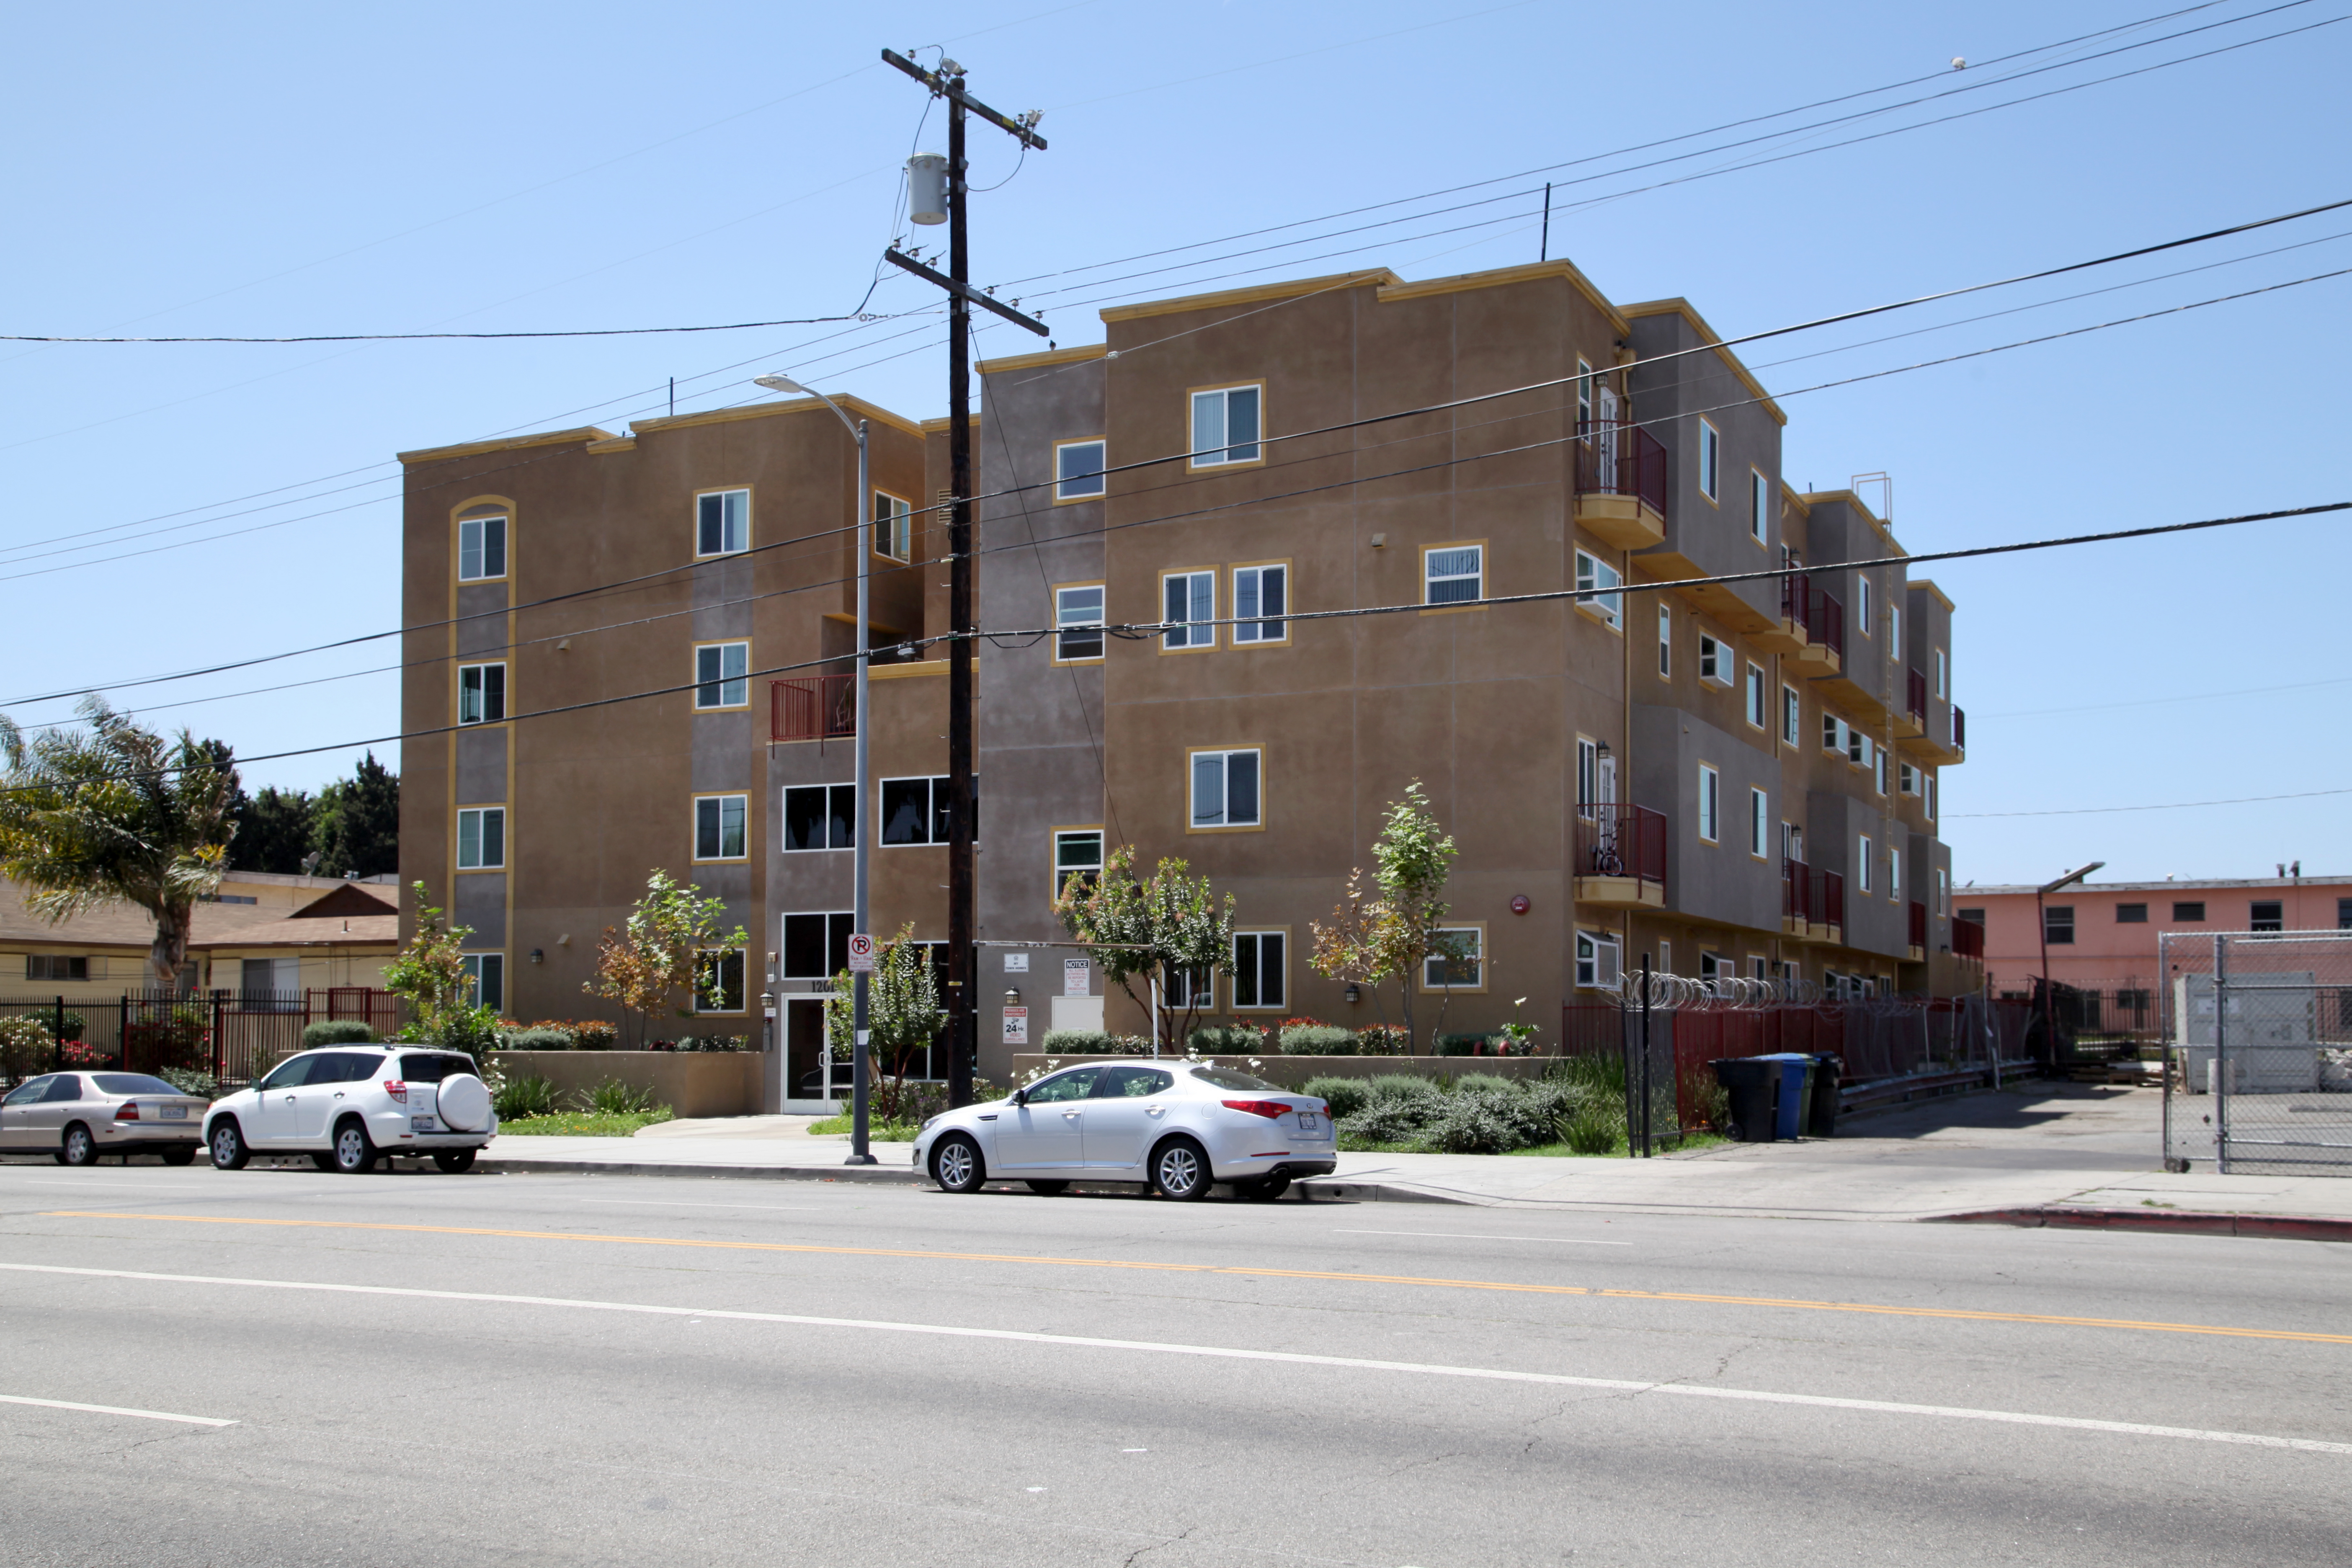 Street view of a three story brown building with car parking adjacent to the property